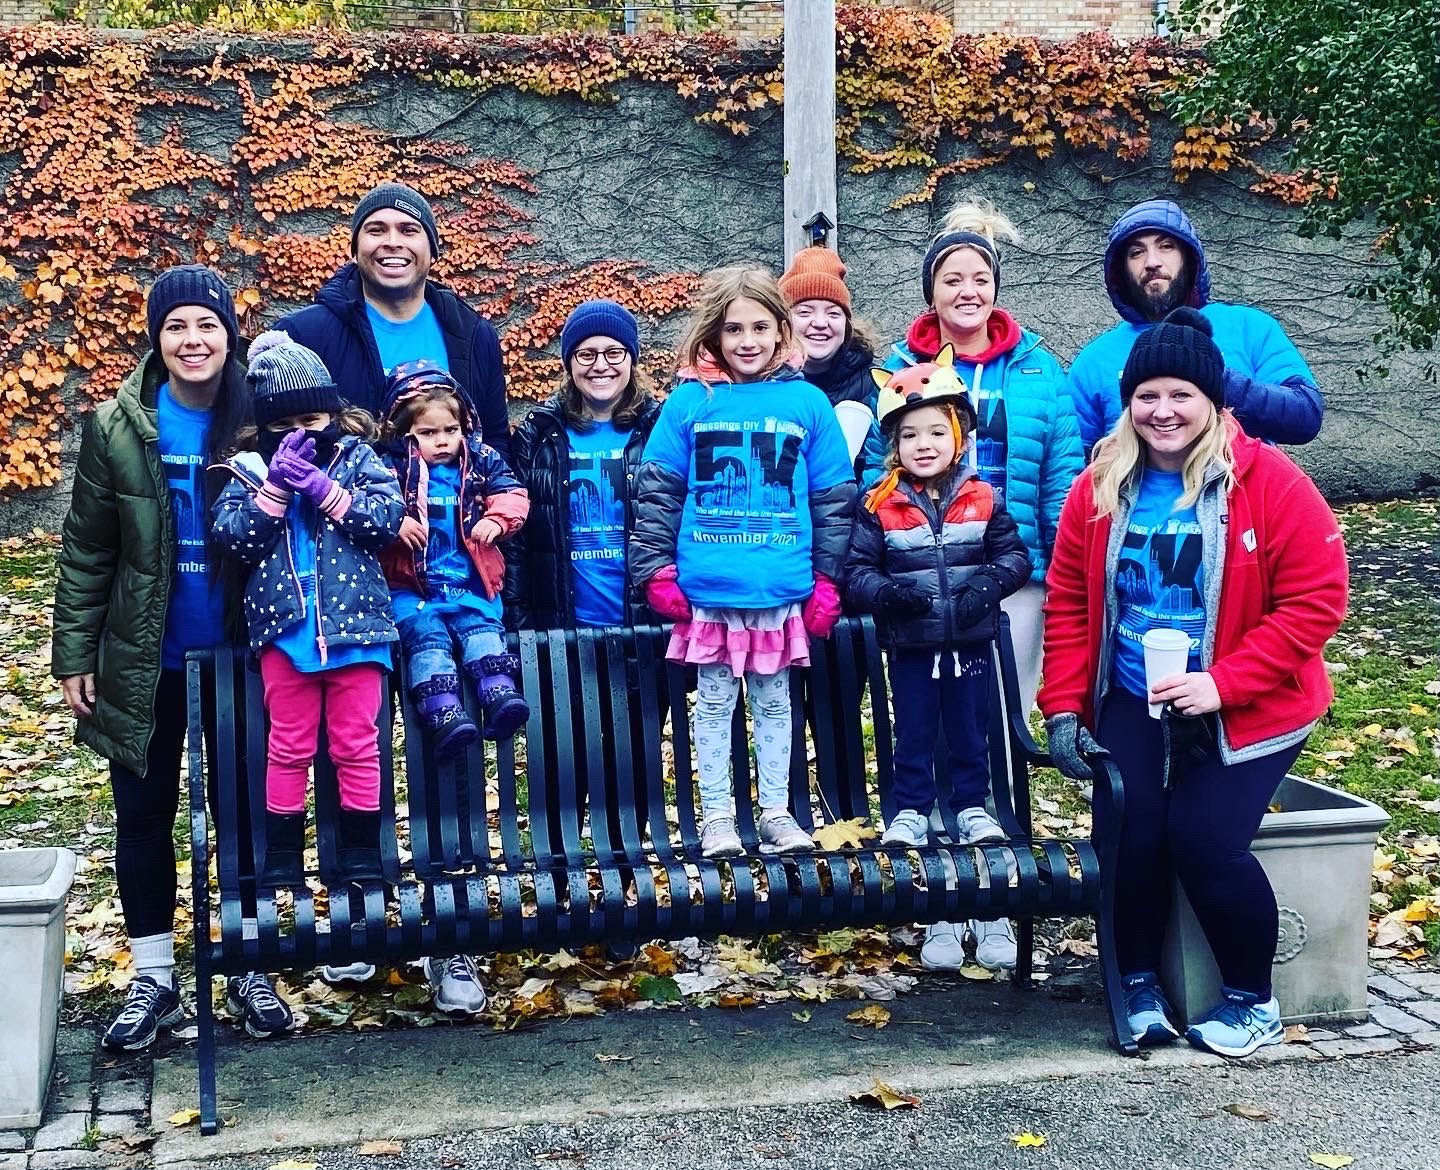 The 2021 DIY 5K Raised over $90,000 to Feed Chicagoland Kids